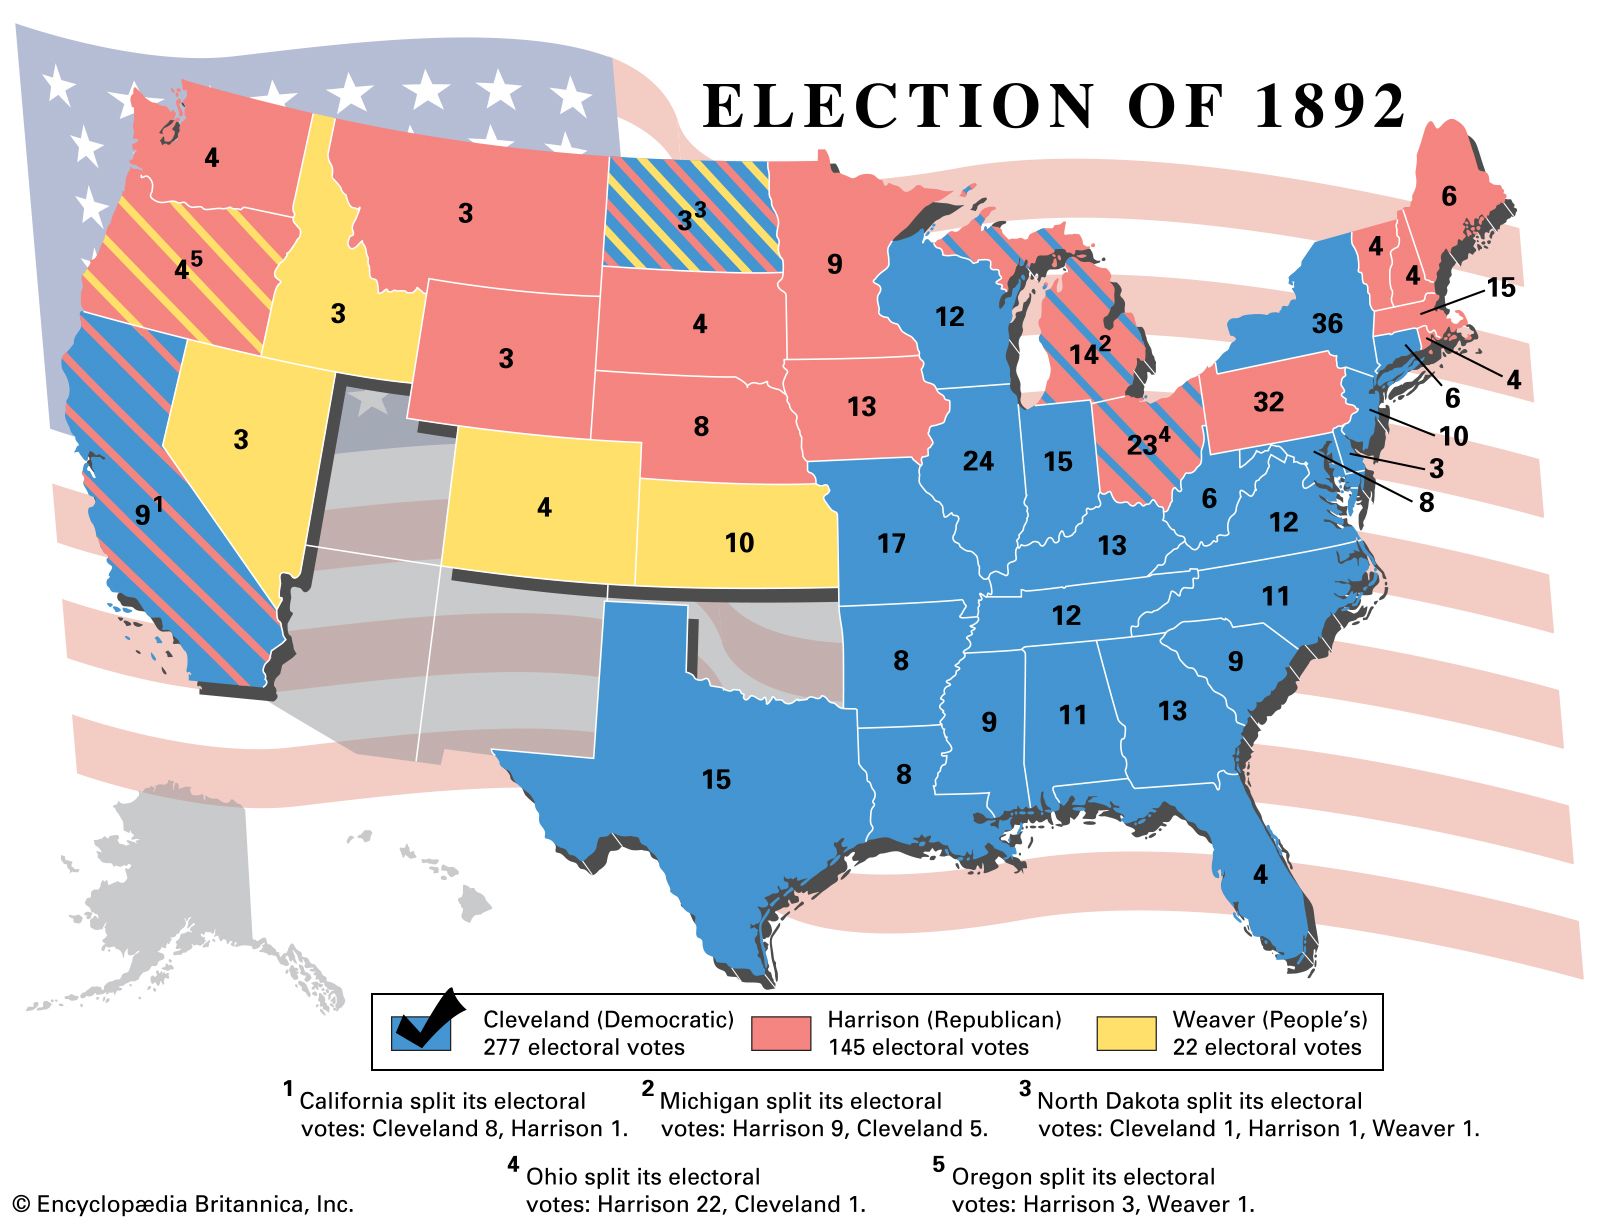 election-Results-American-Votes-Candidate-Sources-Political-1892.jpg